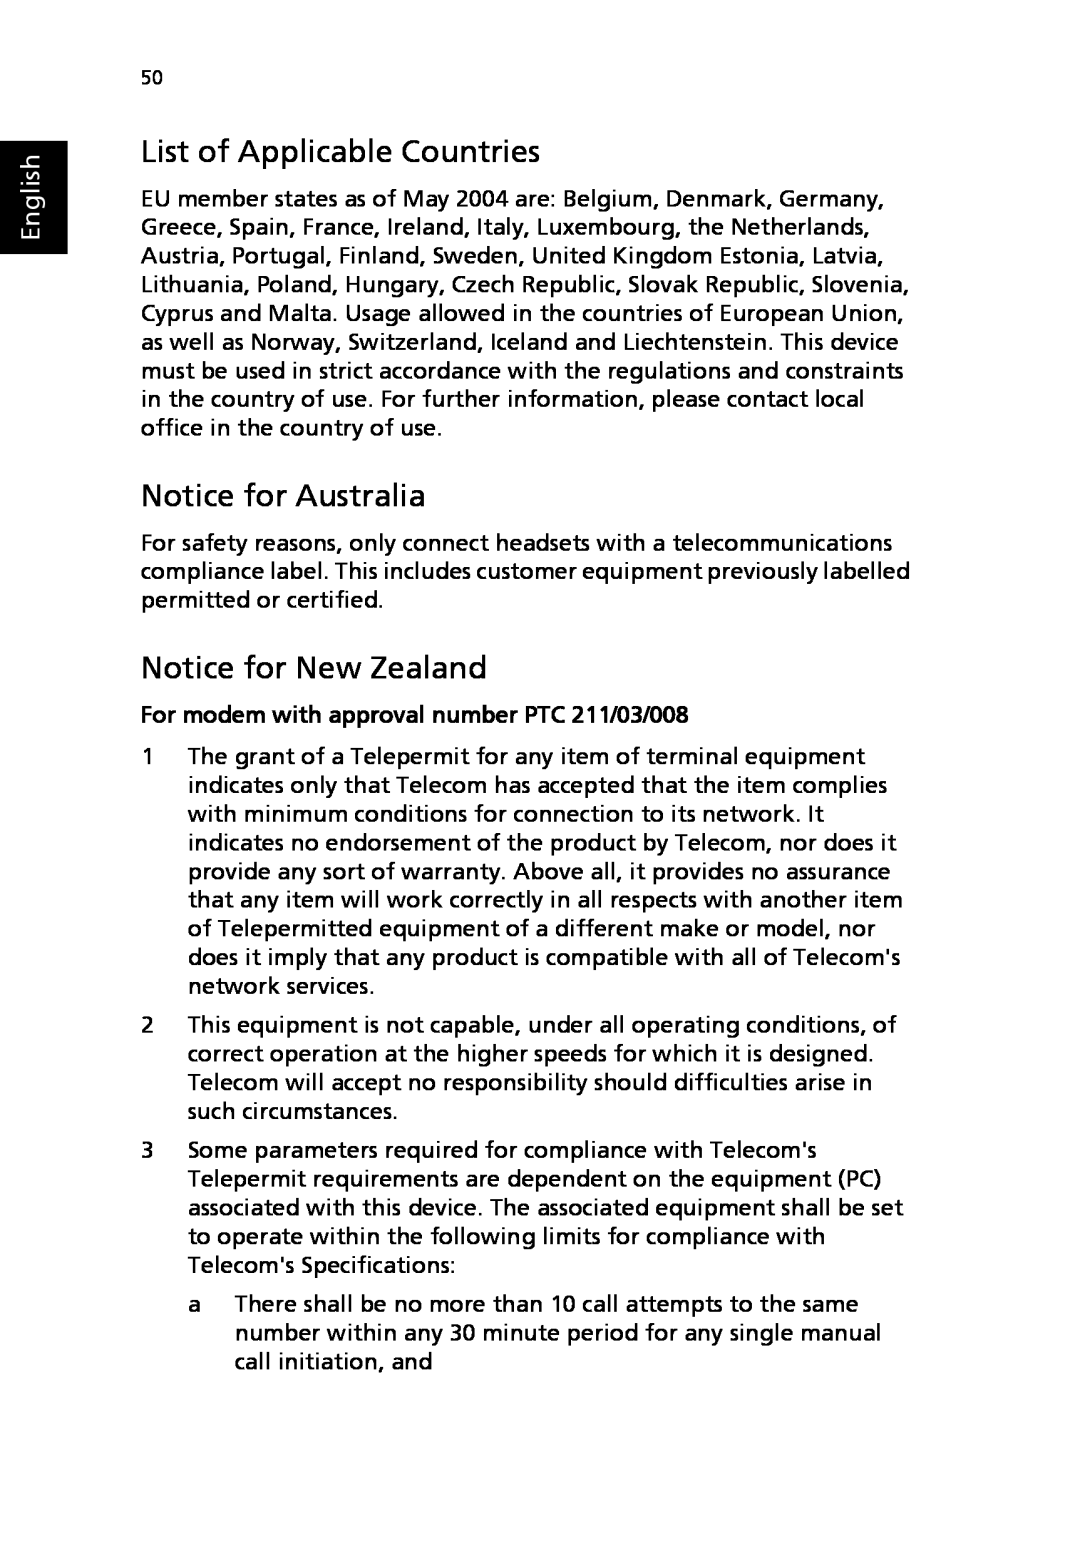 Acer 2310 Series manual List of Applicable Countries, Notice for Australia, Notice for New Zealand, English 